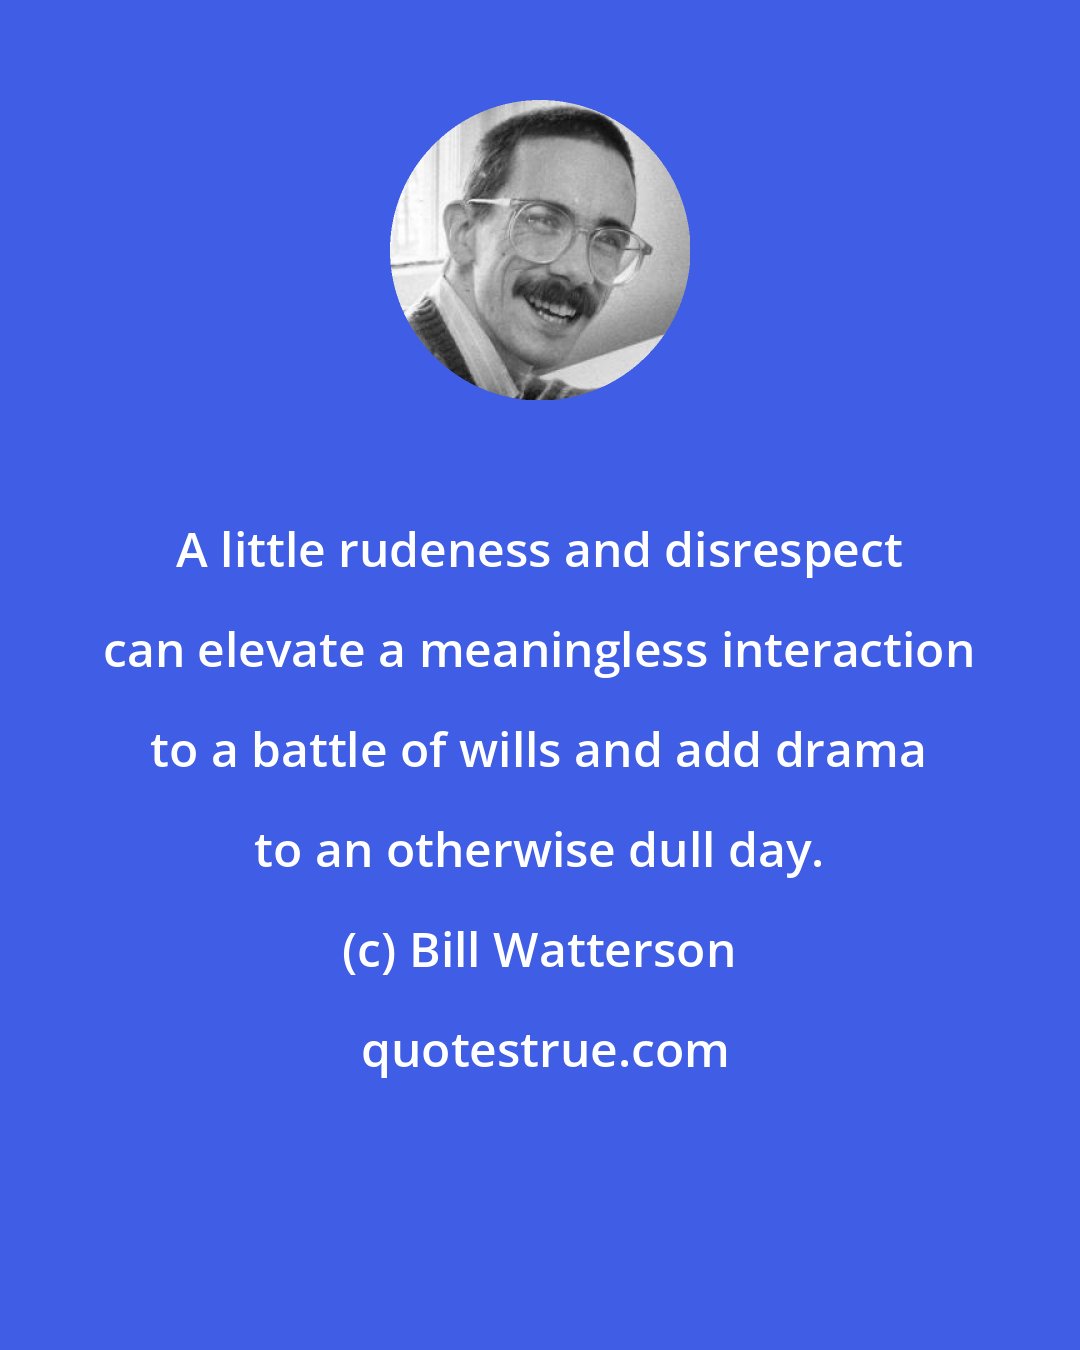 Bill Watterson: A little rudeness and disrespect can elevate a meaningless interaction to a battle of wills and add drama to an otherwise dull day.